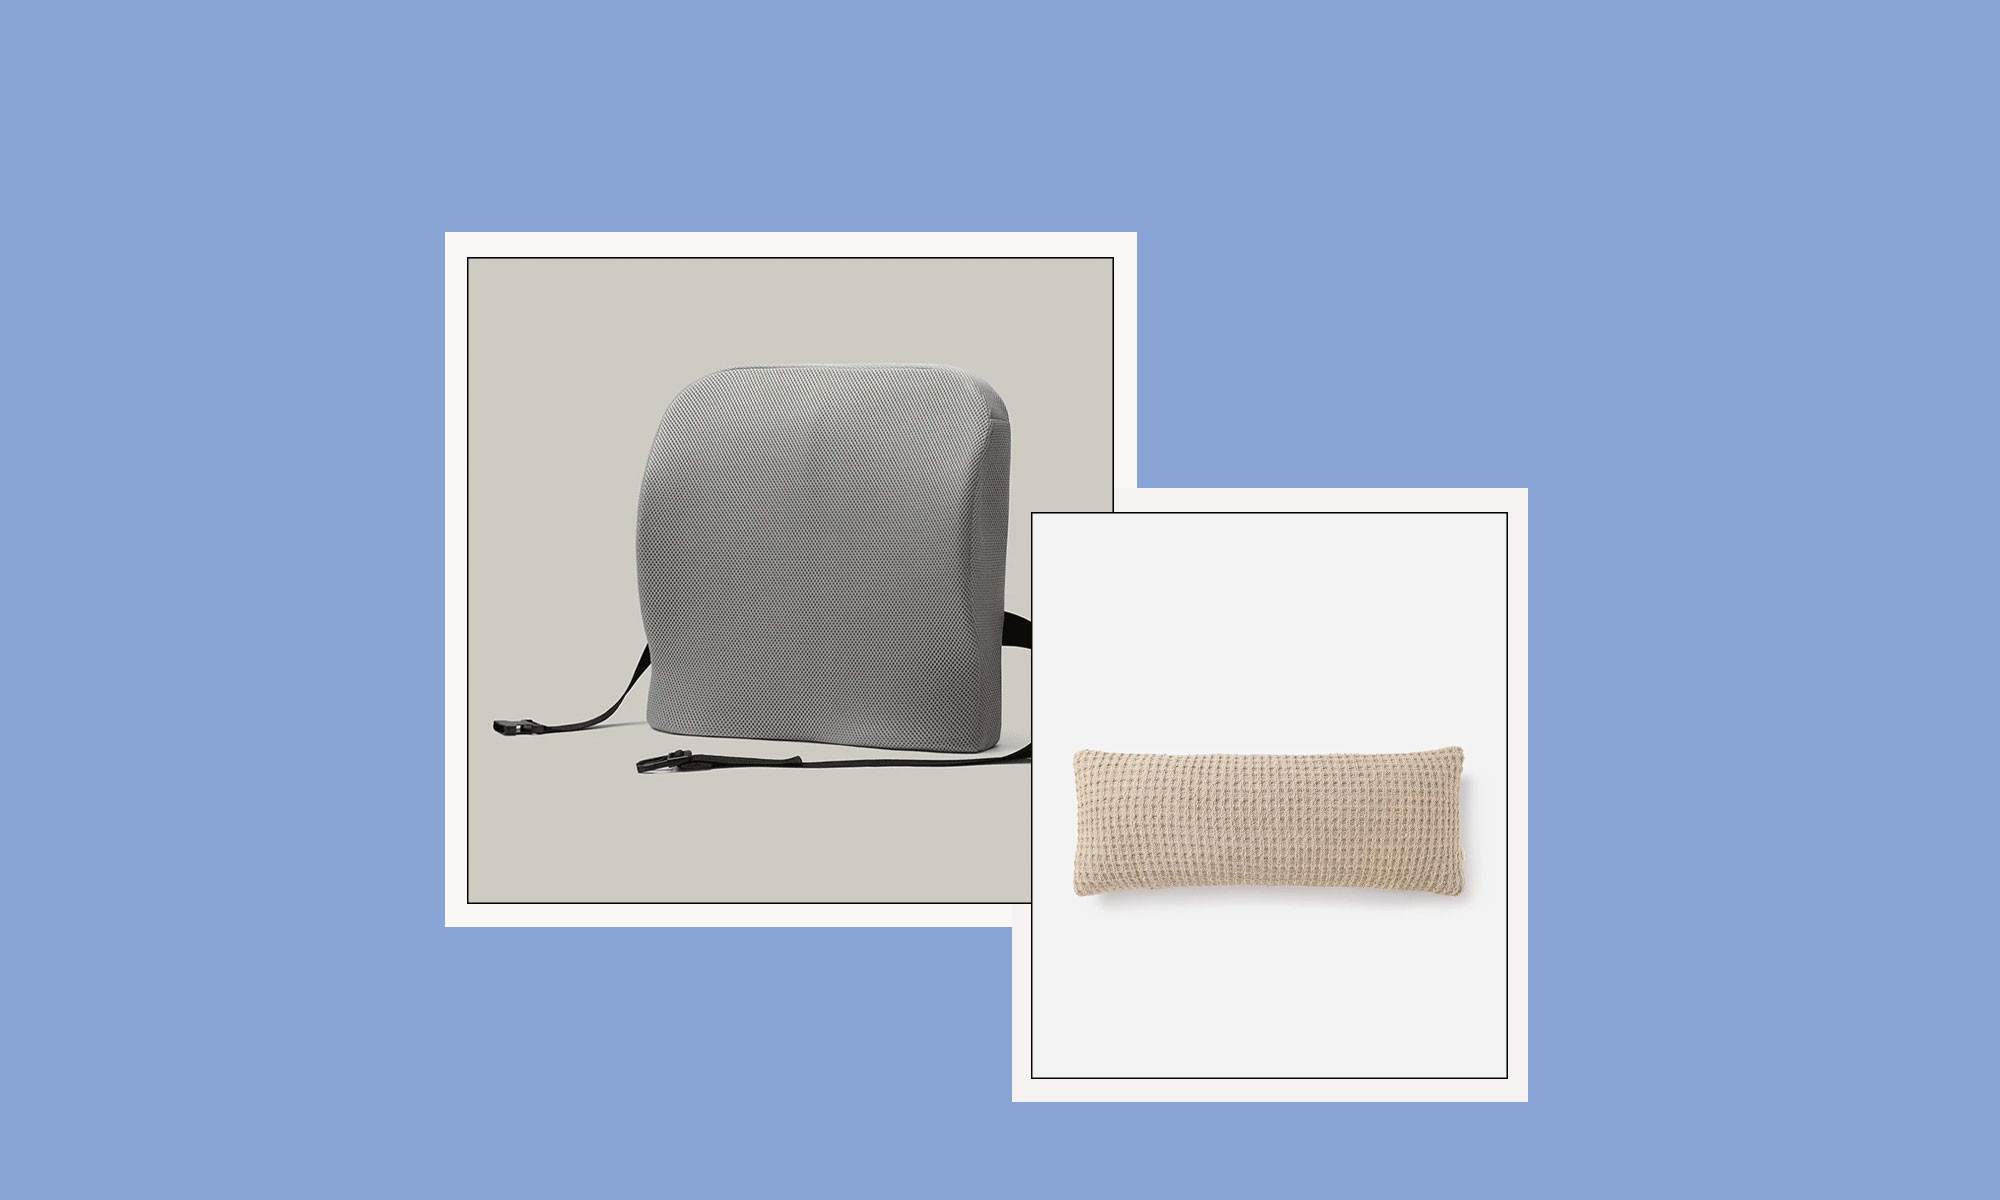 Check Our Top Recommendations for Travel Lumbar Support